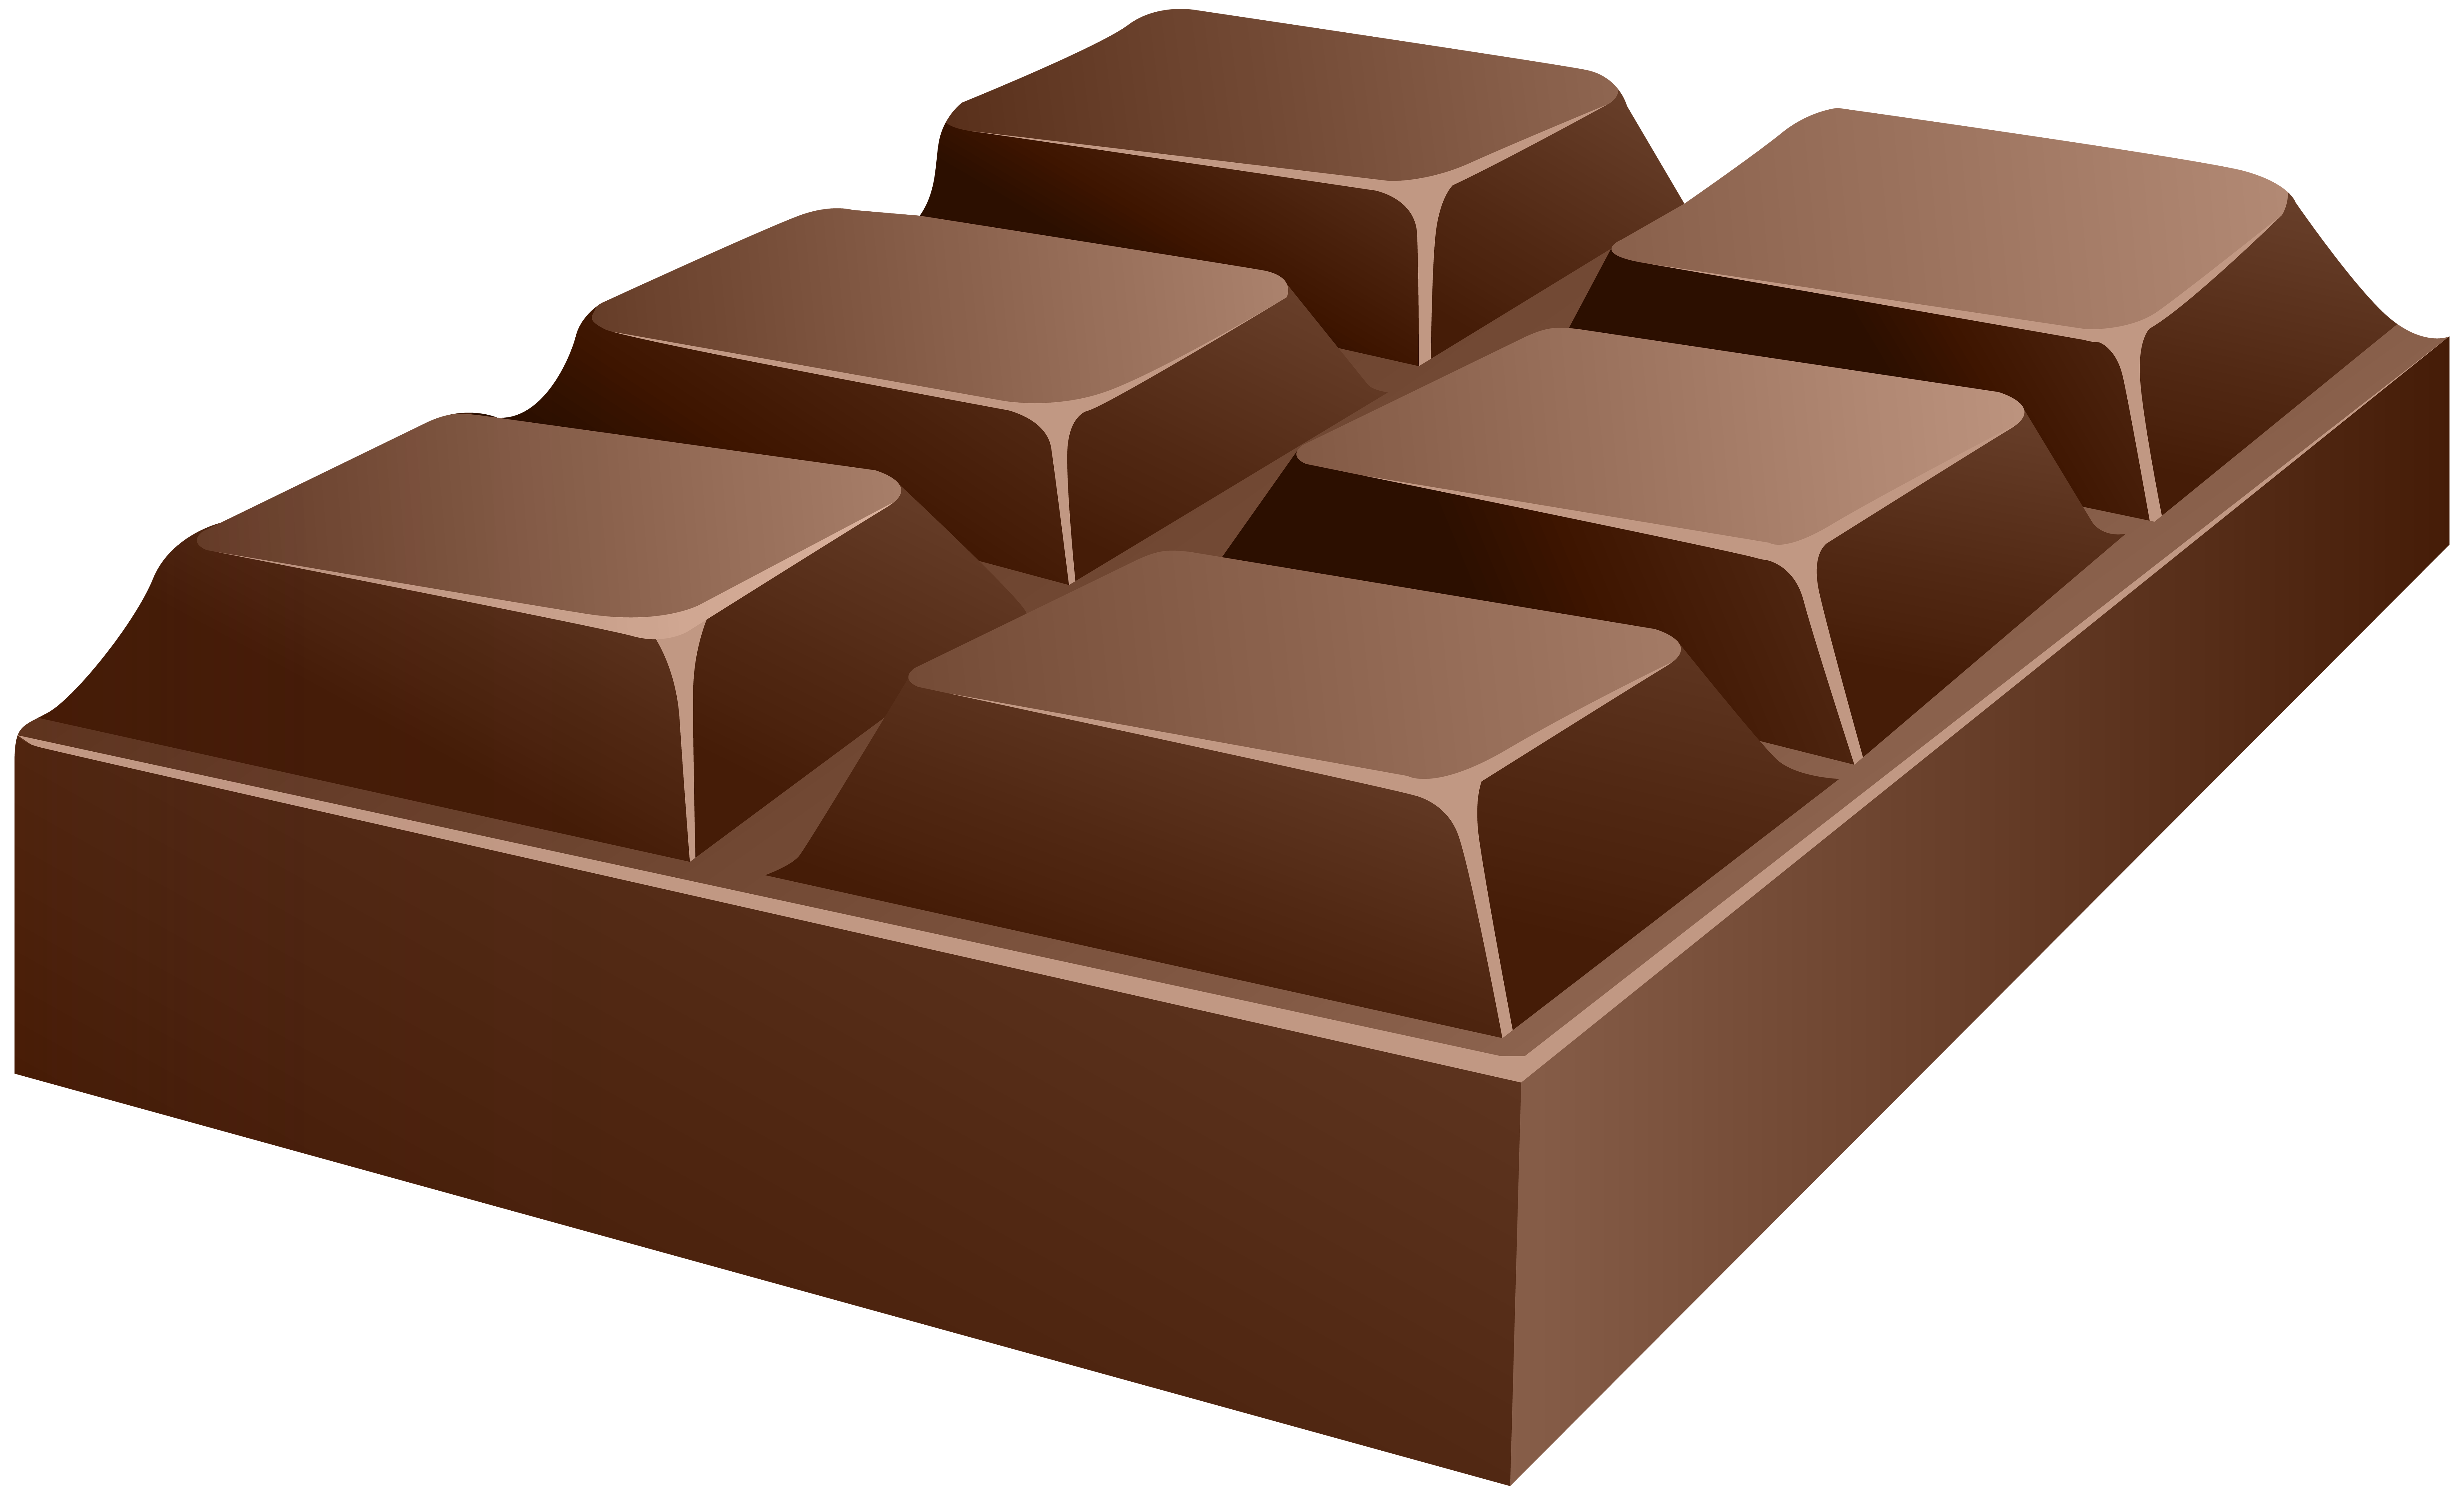 chocolate clipart